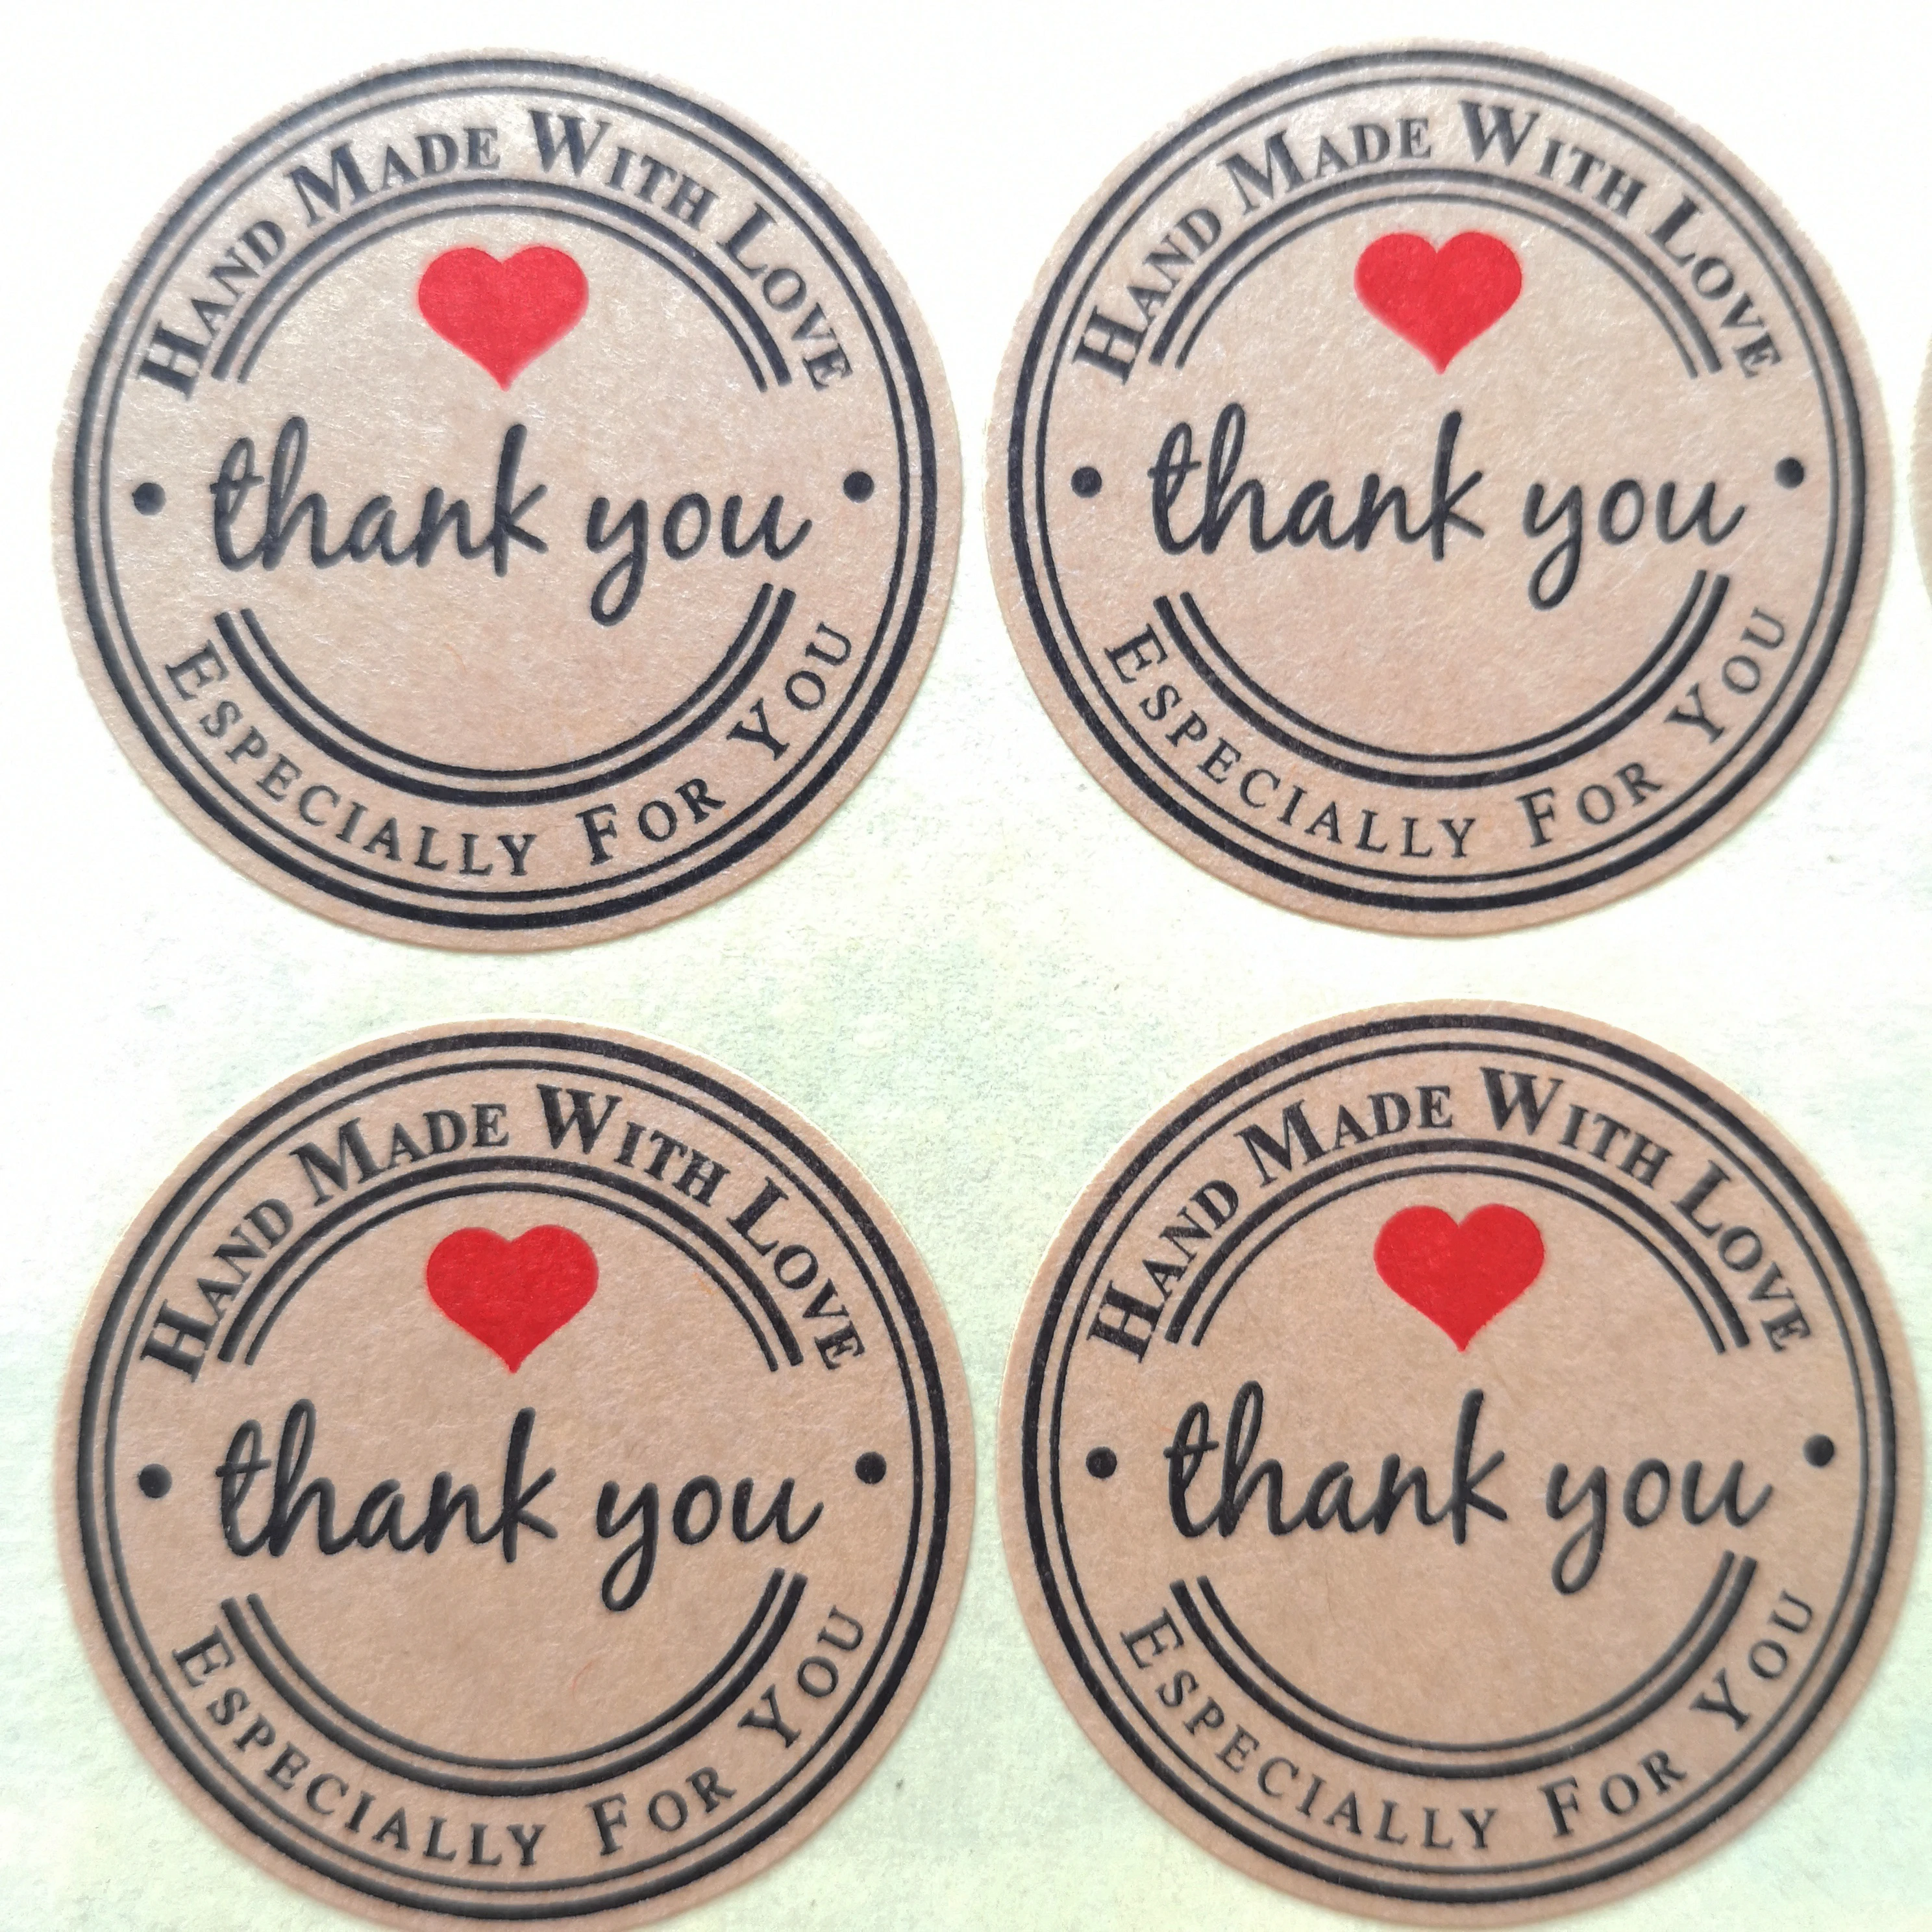 360 stickers/lot 38mm round LOVE THANK YOU Self-adhesive craft paper sealing label sticker, Item No.TK20